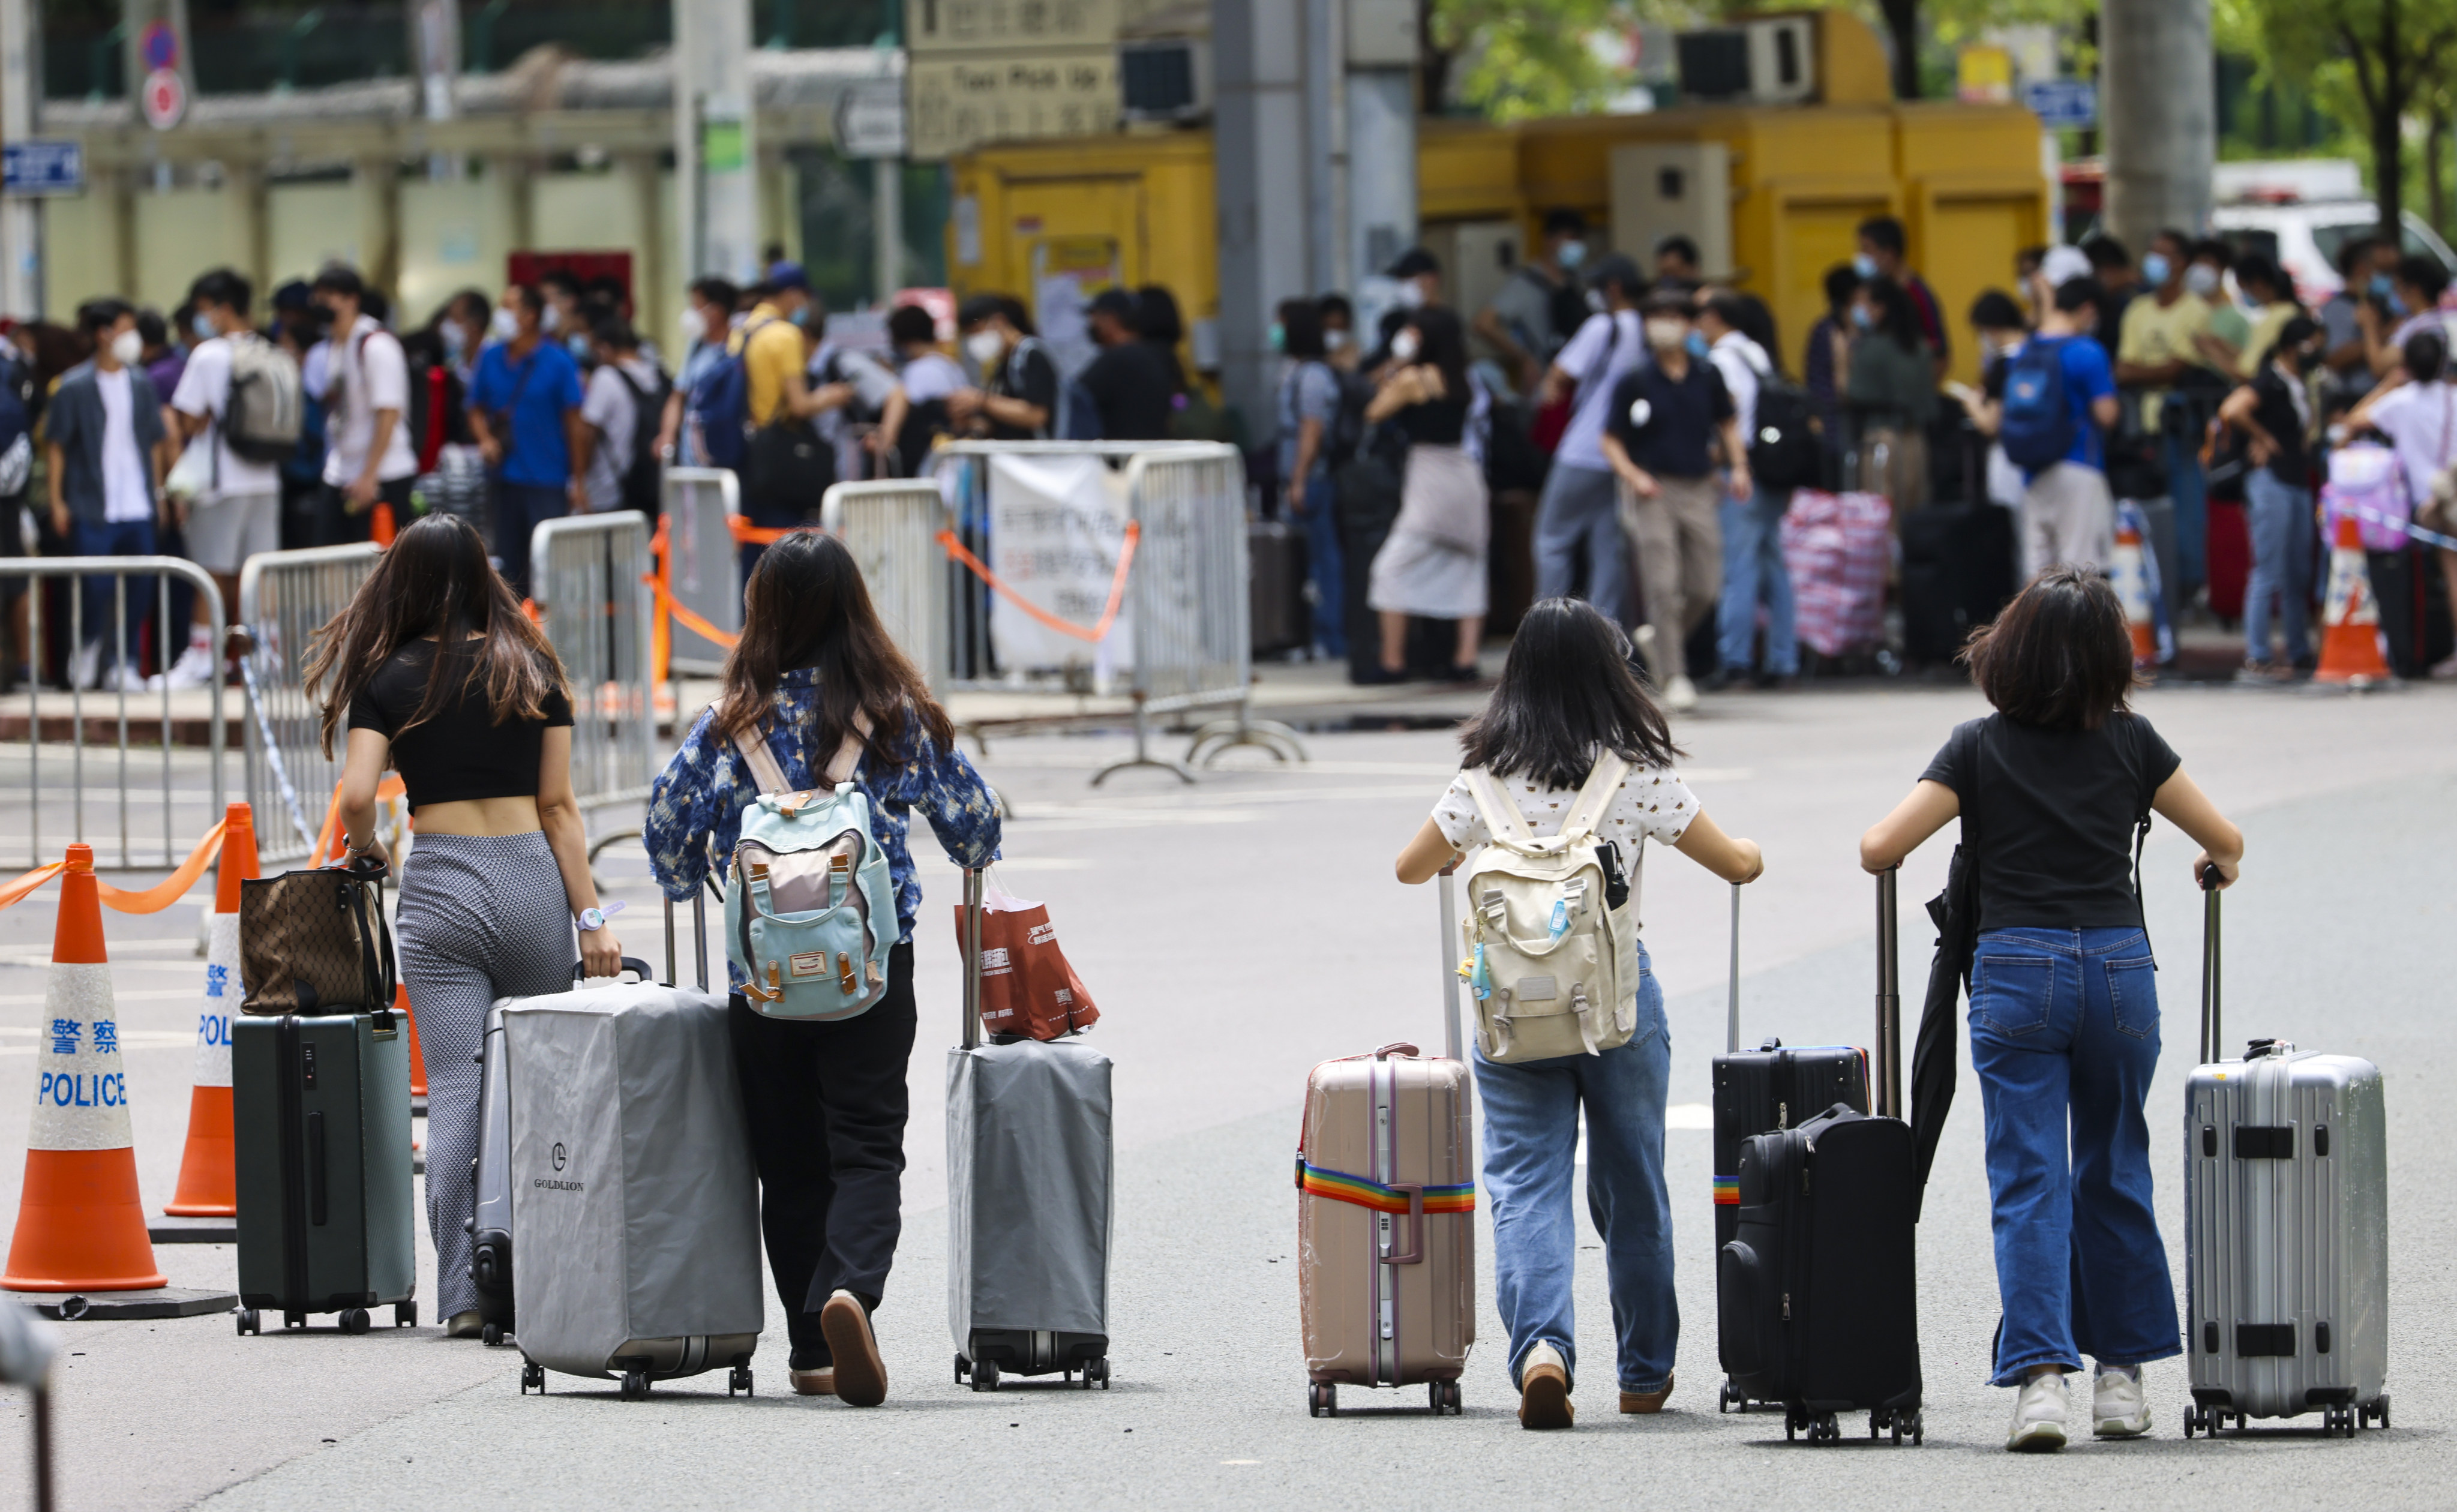 New channels will be set up at the border to facilitate thousands of Hong Kong students crossing into mainland China to start the new school year on time. Photo: Dickson Lee